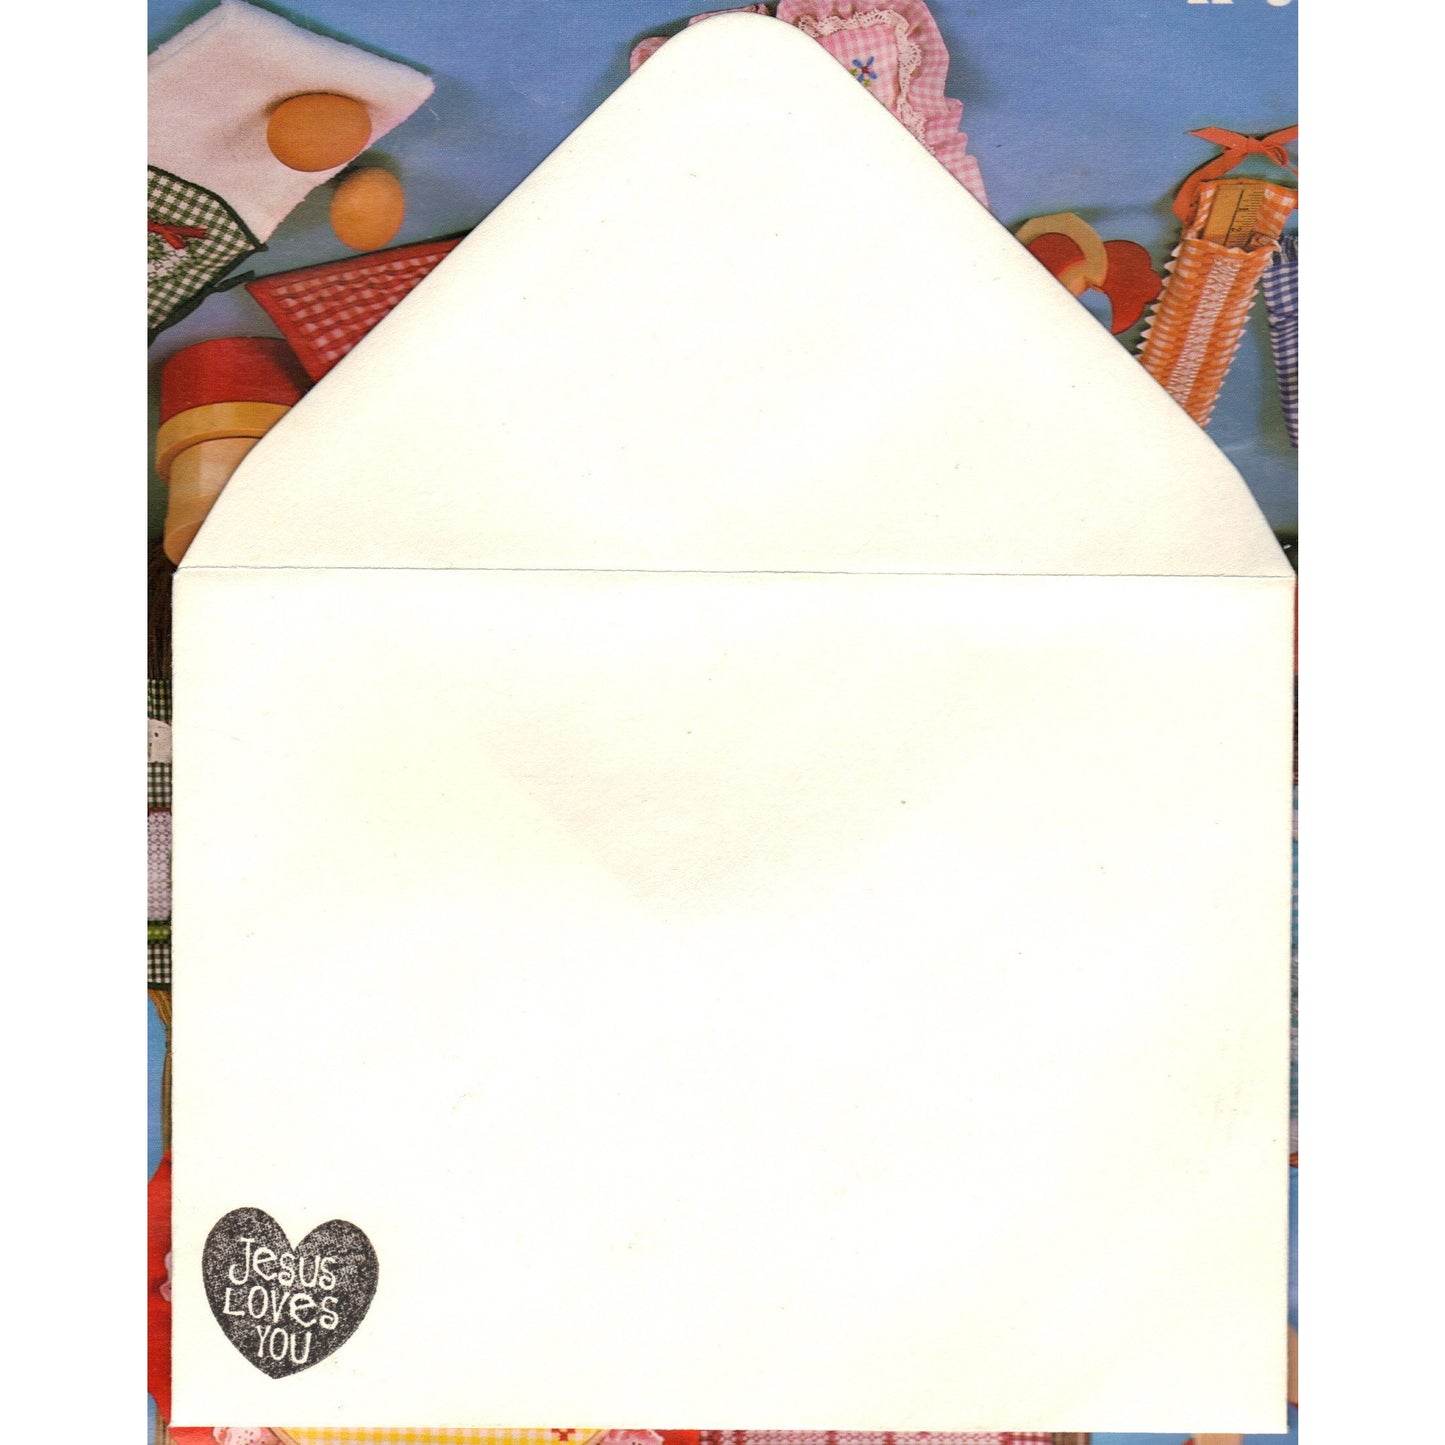 Holy Communion Religious Handmade Good Greeting Supply Card - Cards And Other Paper Products - Made In U.S.A. - SharPharMade - 3